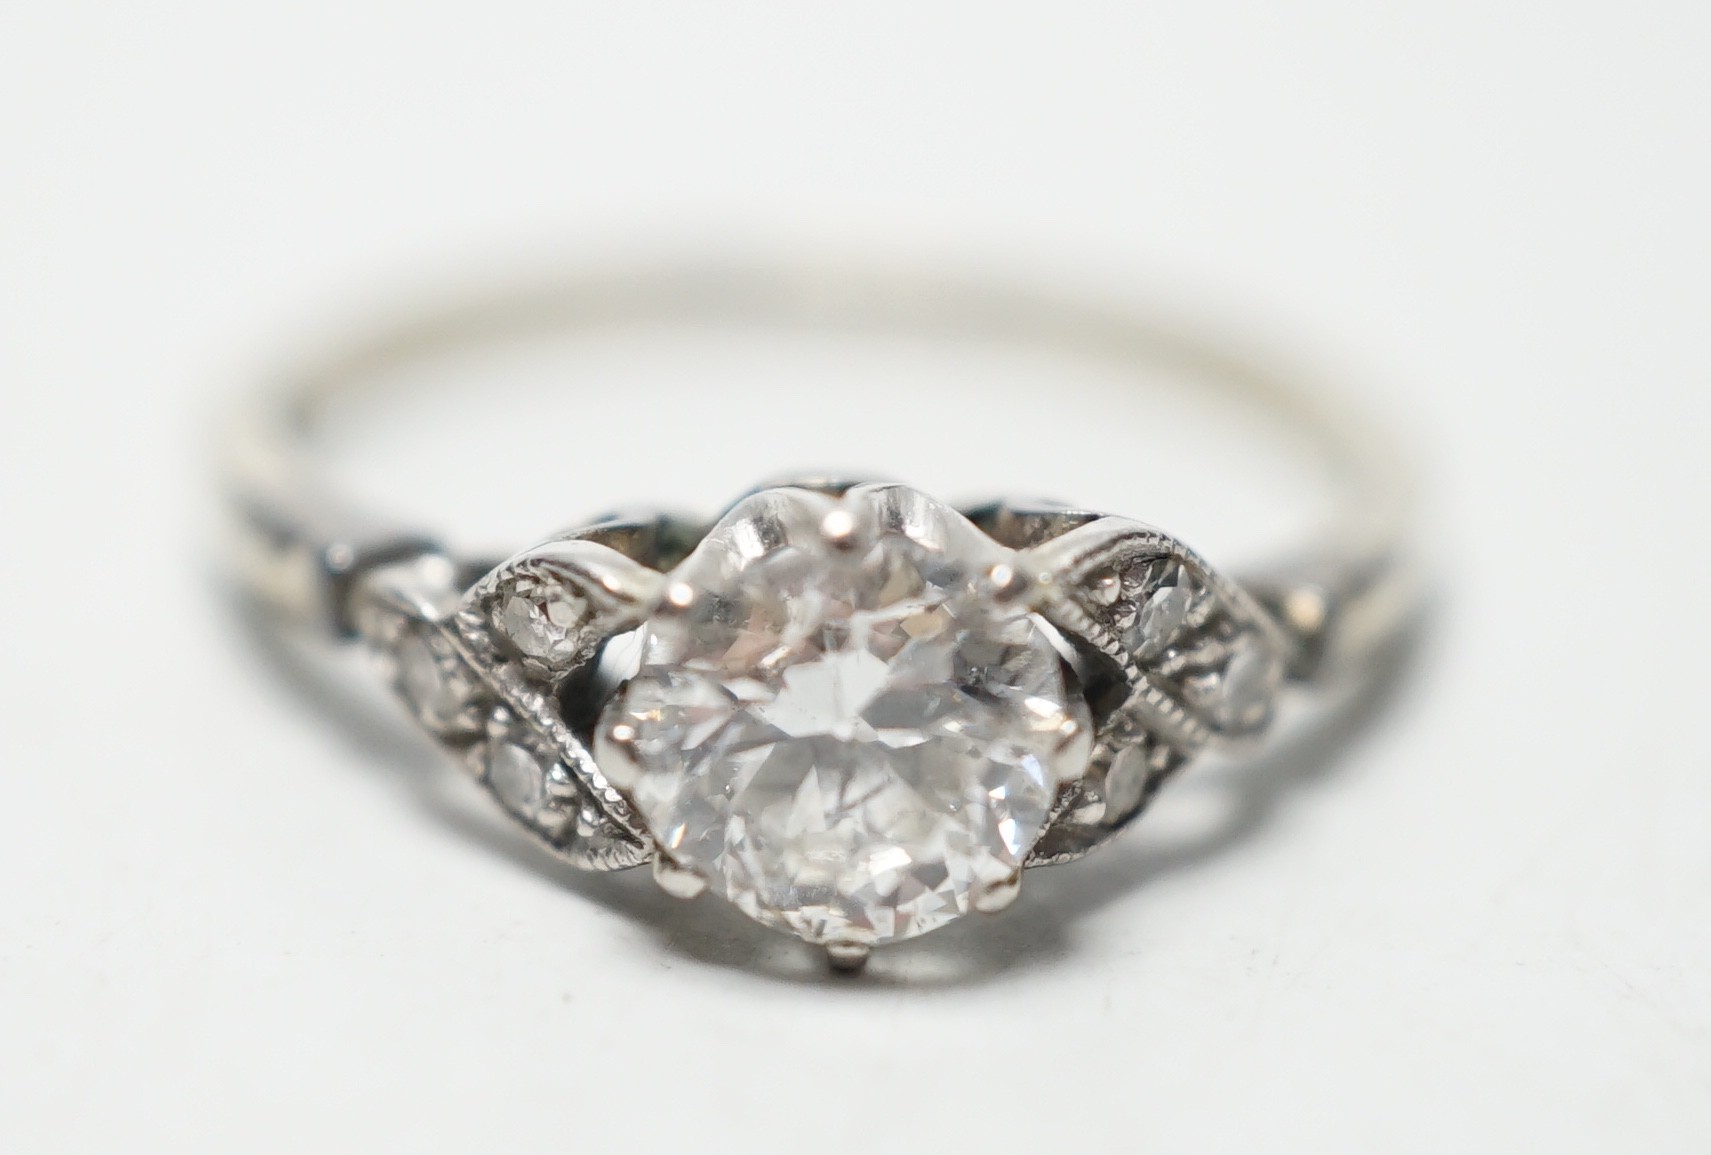 An 18ct white metal and single stone diamond ring, with diamond chip set shoulders, the stone weighing approximately 0.60ct, size M, gross weight 1.8 grams.